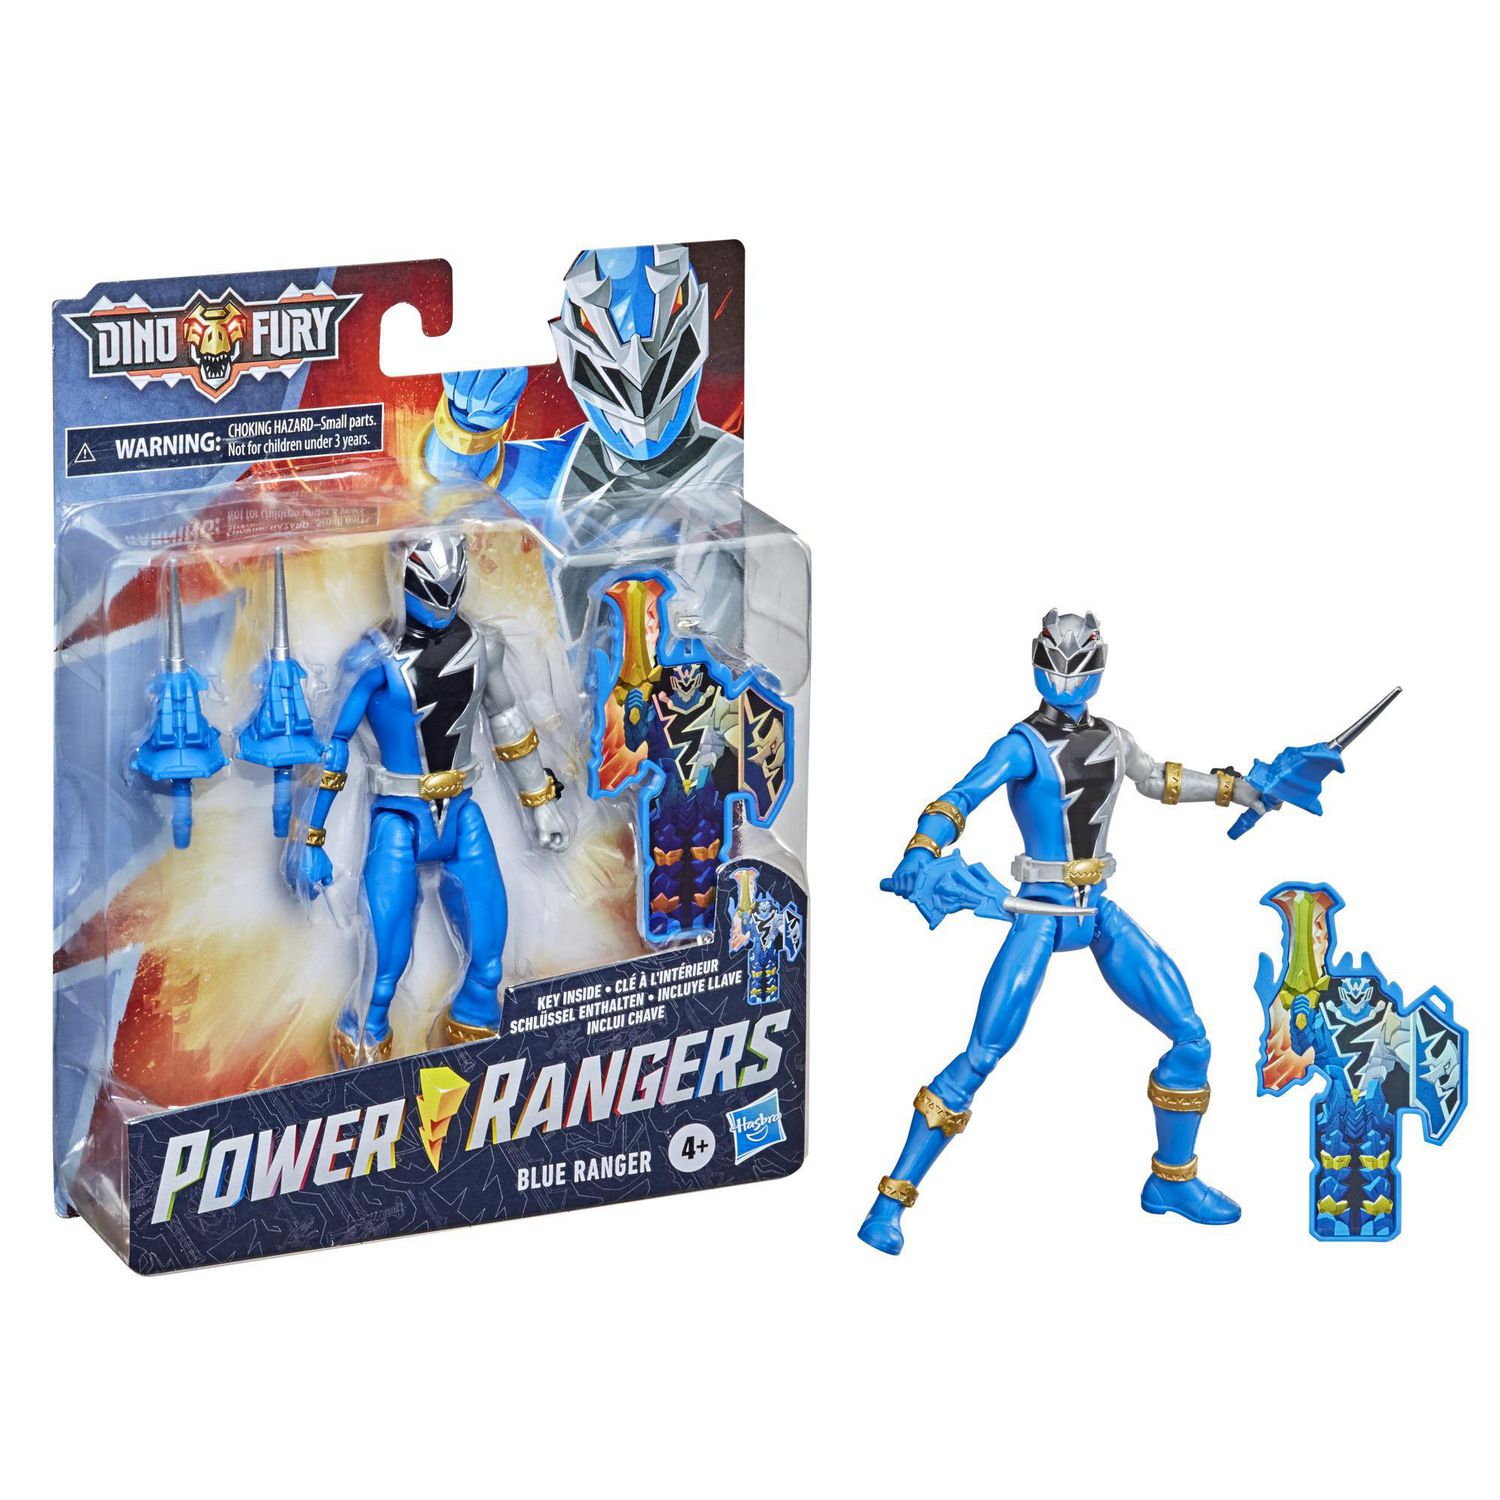 Power Rangers Dino Fury Blue Ranger 6-Inch Action Figure Toy